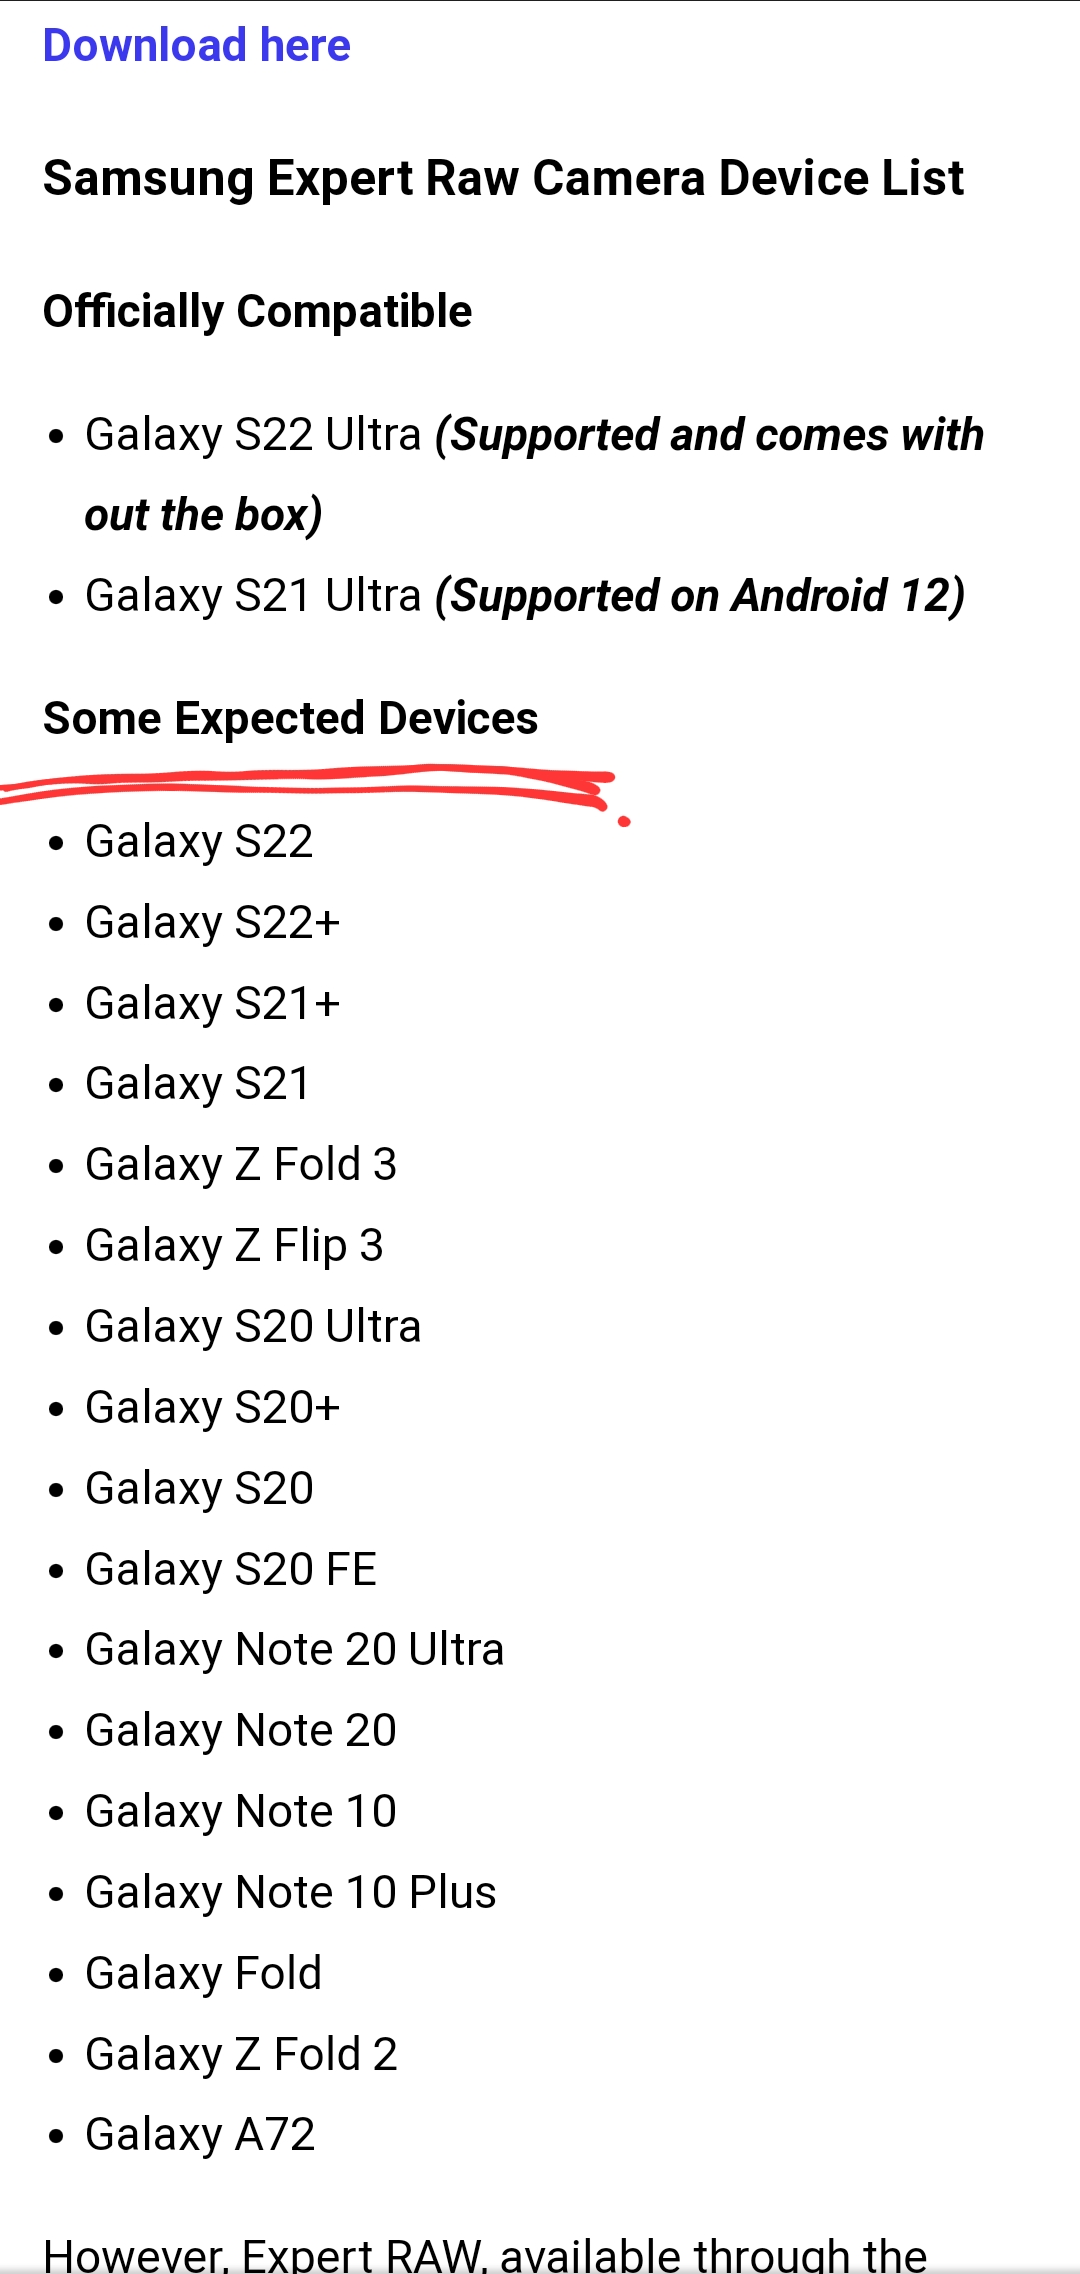 Will the S21 FE get Expert RAW? - Samsung Members